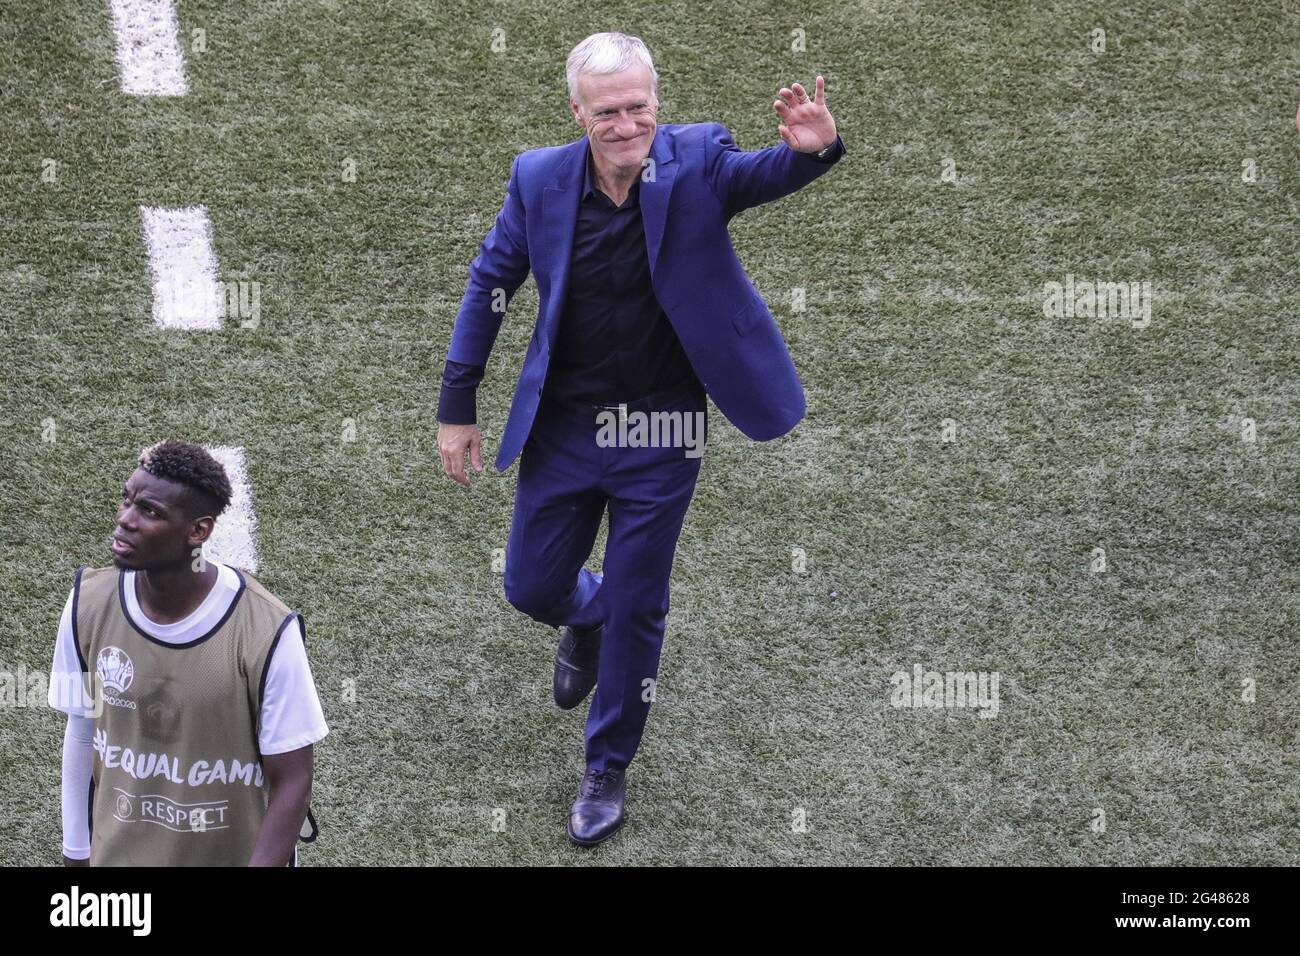 Budapest, Hungary. 19th June, 2021. French manager Didier Deschamps after the EURO 2020 Group F football match between Hungary and France in the Ferenc Puskas Stadium in Budapest Hungary Credit: SPP Sport Press Photo. /Alamy Live News Stock Photo